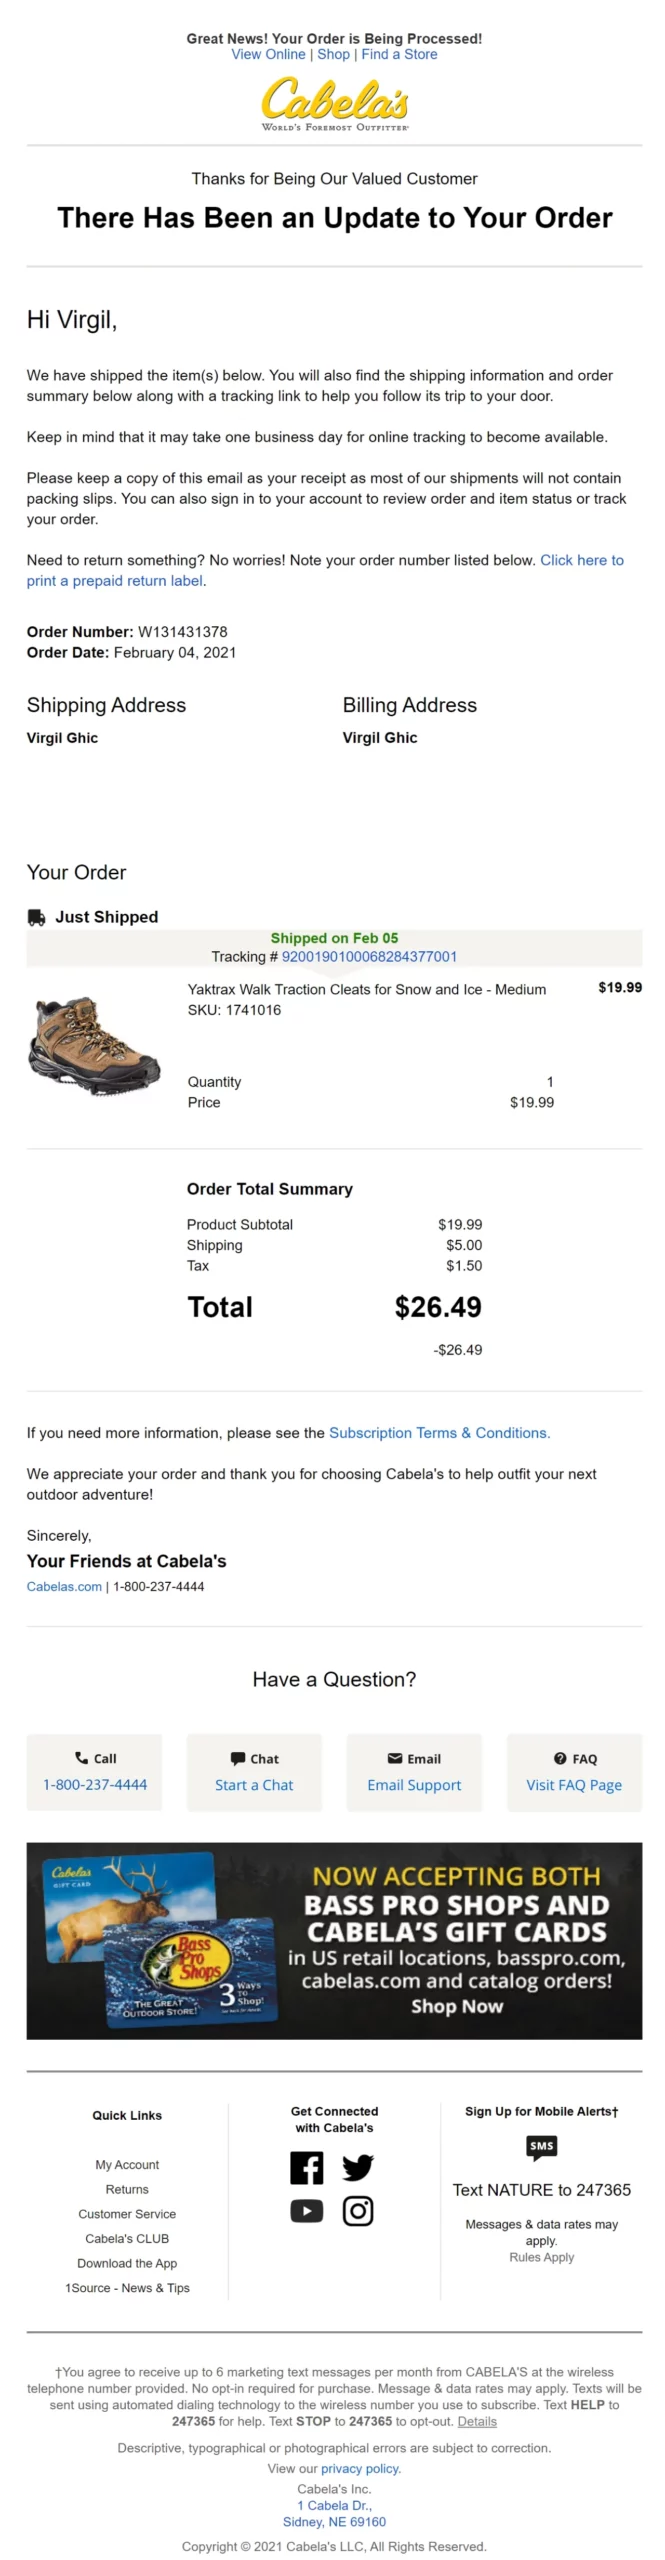 cabelas order shipped email